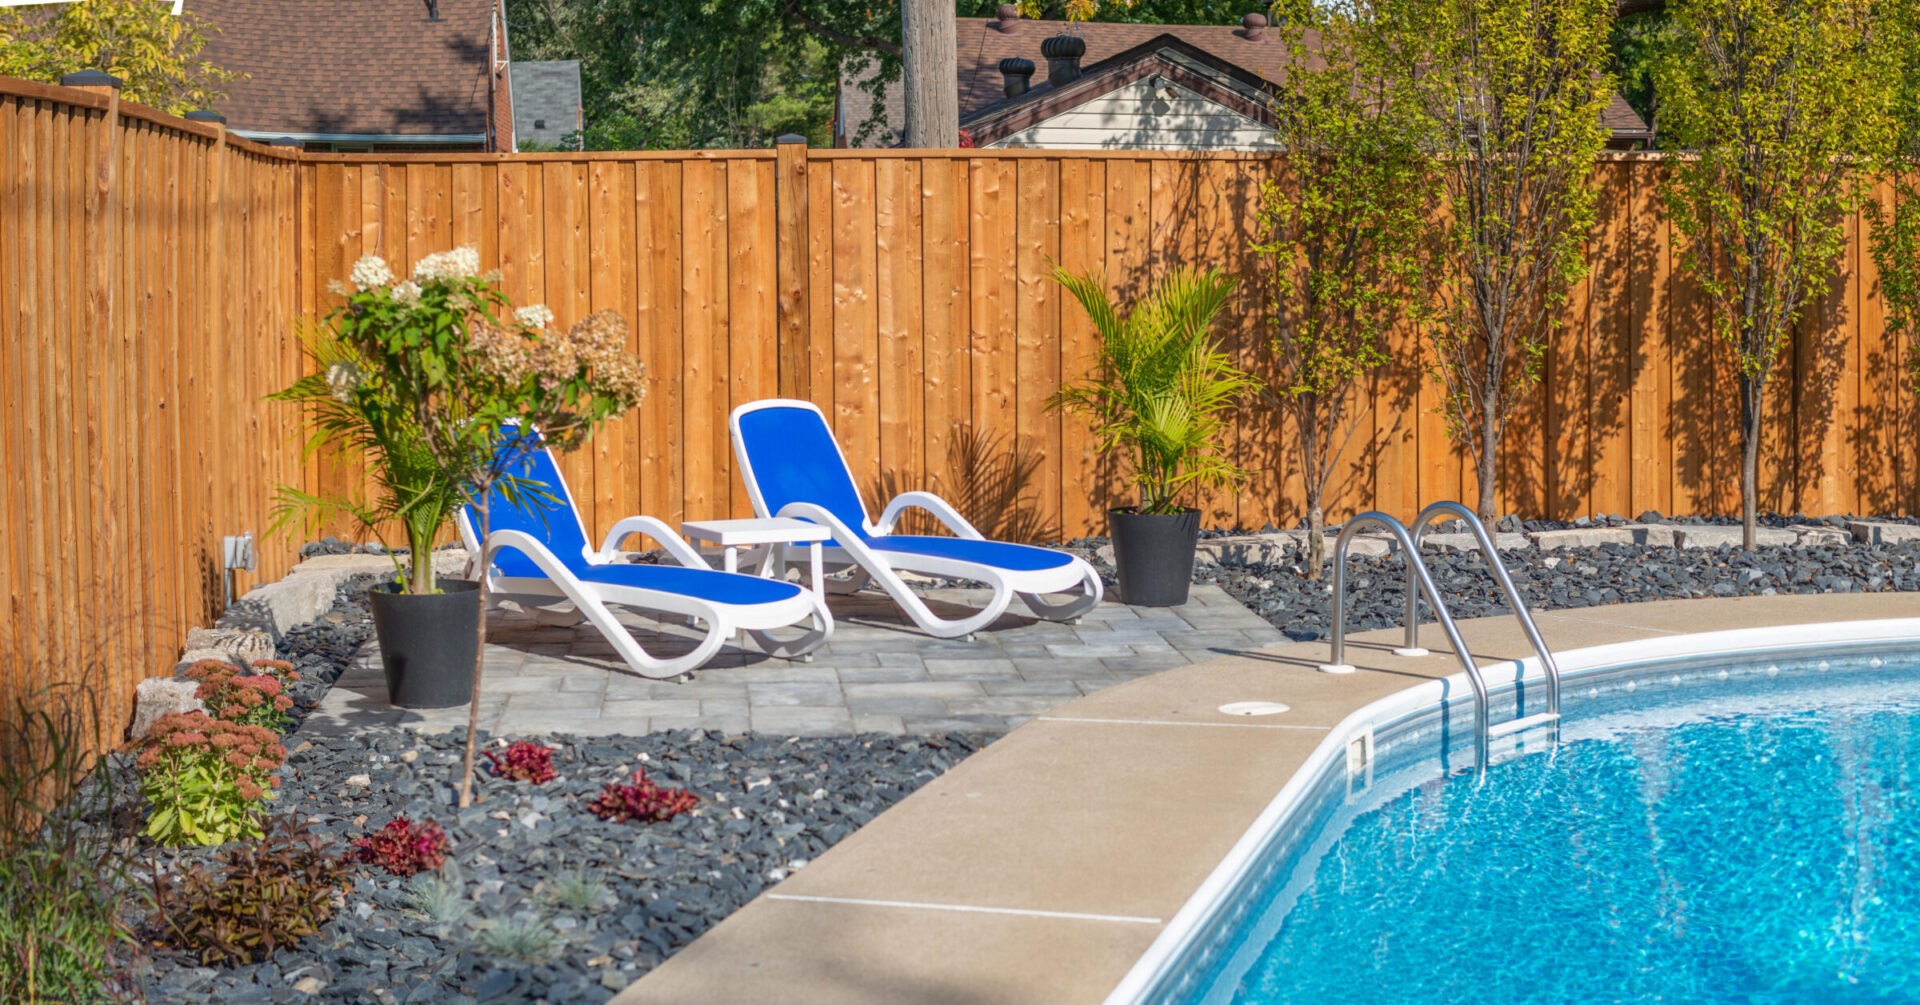 This image shows a serene backyard setting with a swimming pool, blue lounge chairs, potted plants, a stone path, and a wooden fence.